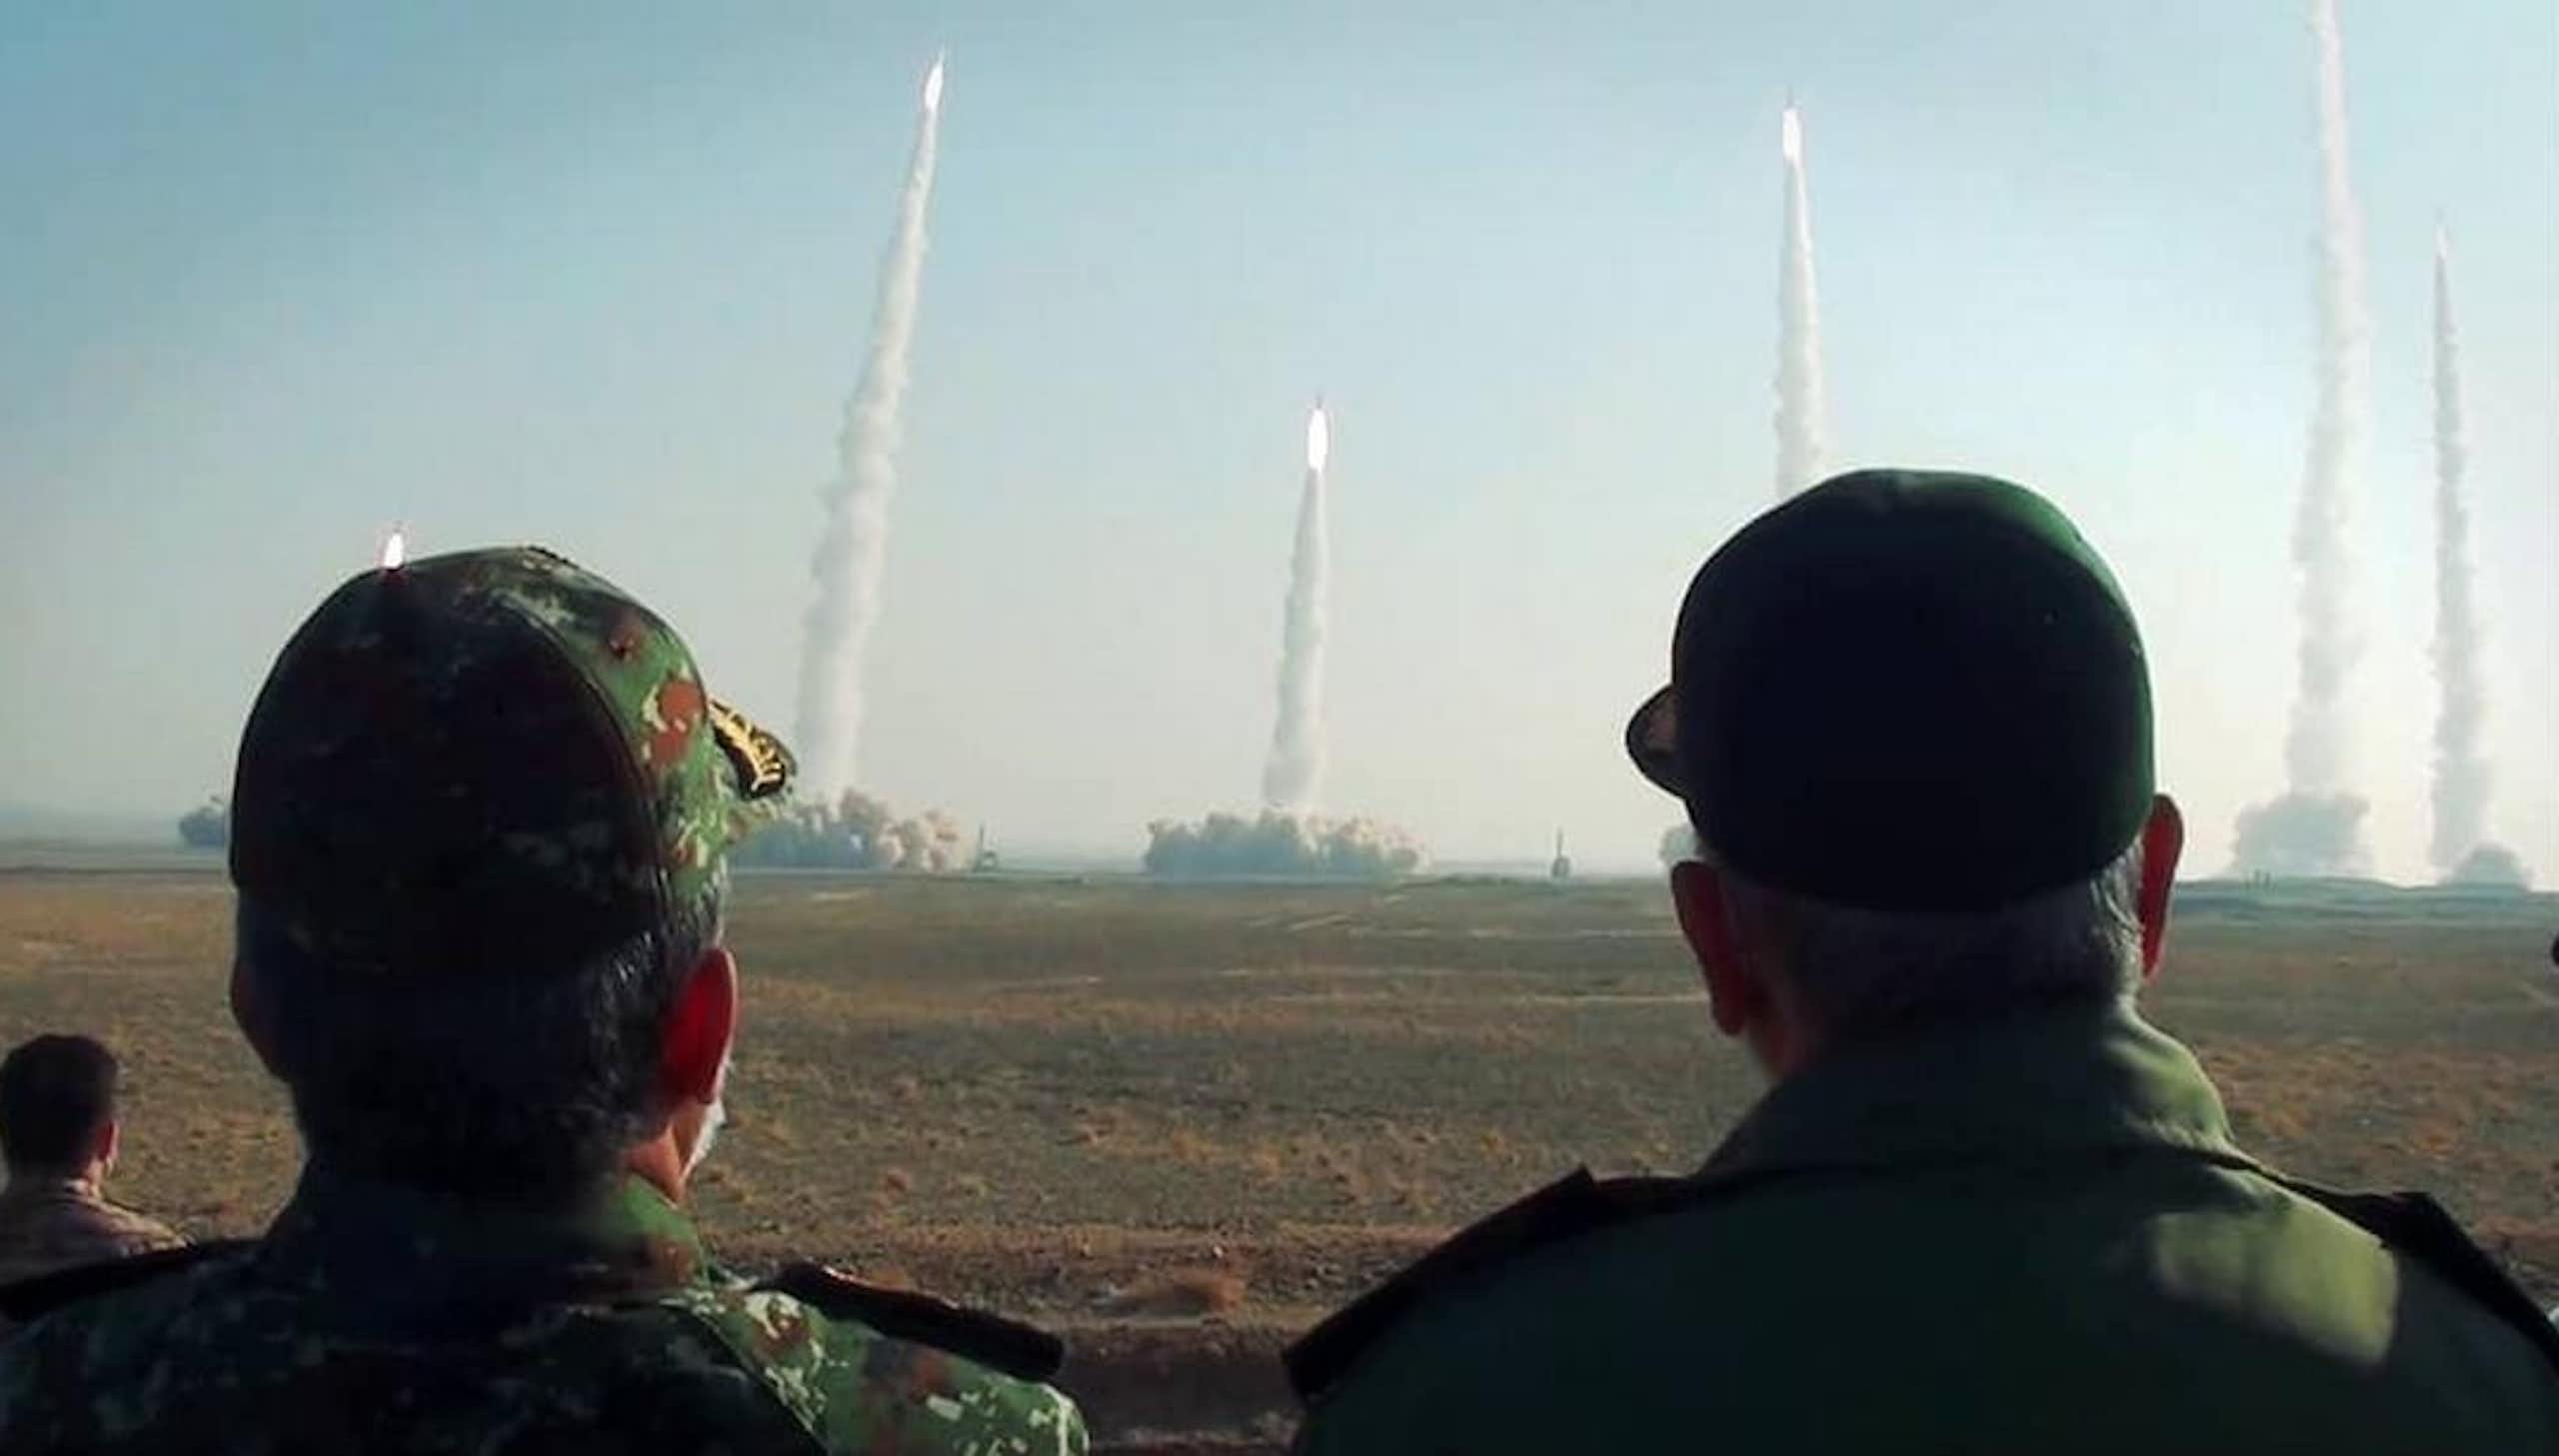 Two men in baseball caps look on as missiles launch surrounded by plumes of smoke.